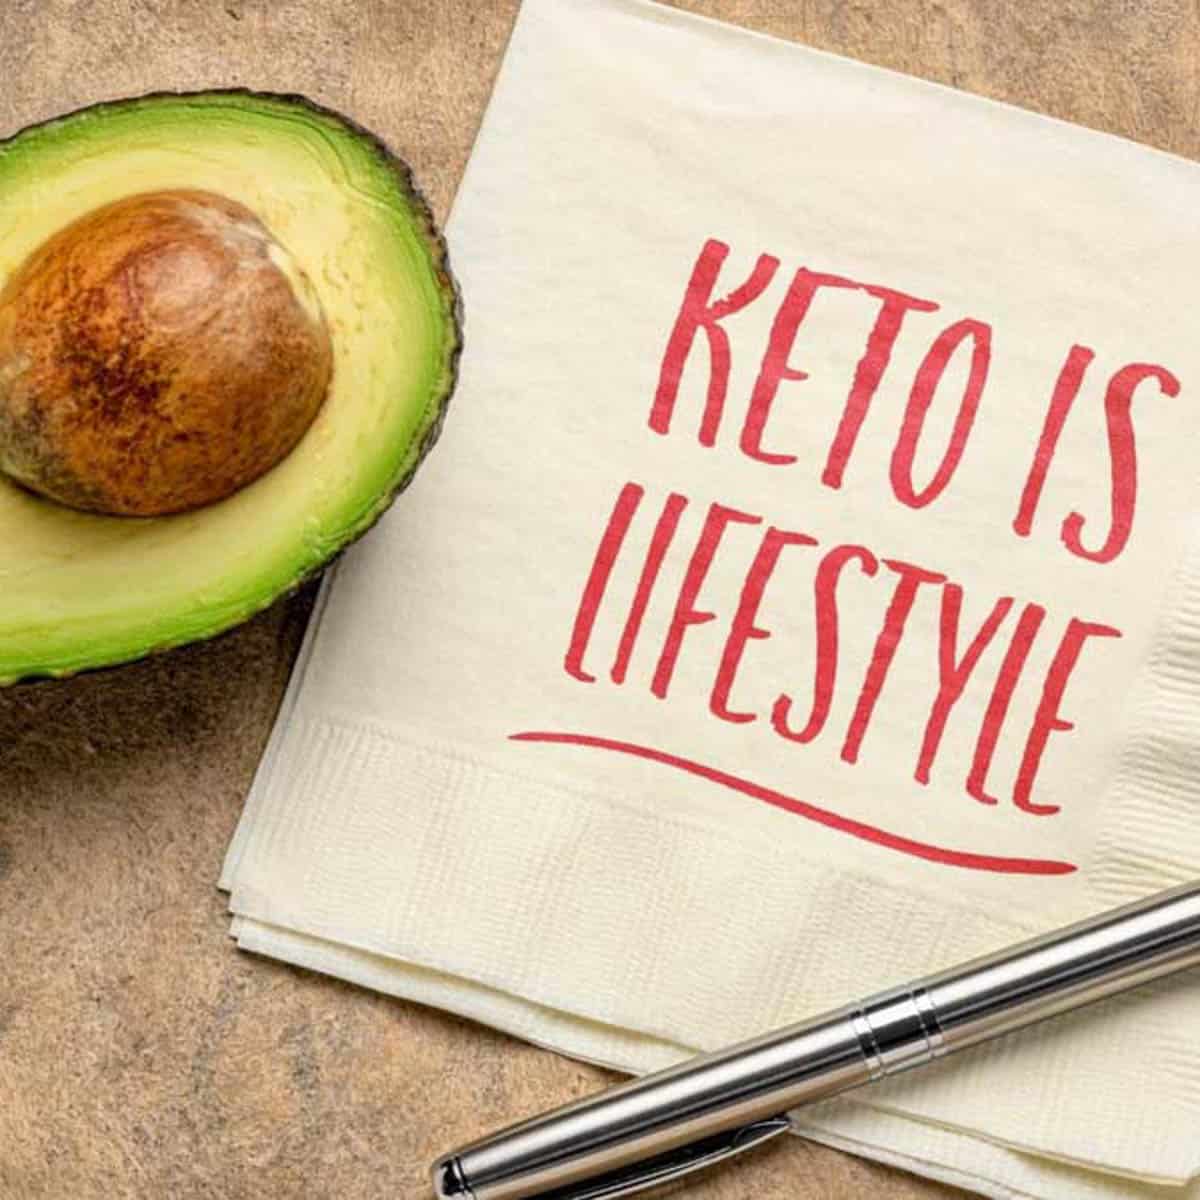 Keto Is Lifestyle in red ink on a square napkin with half an avocado next to it.